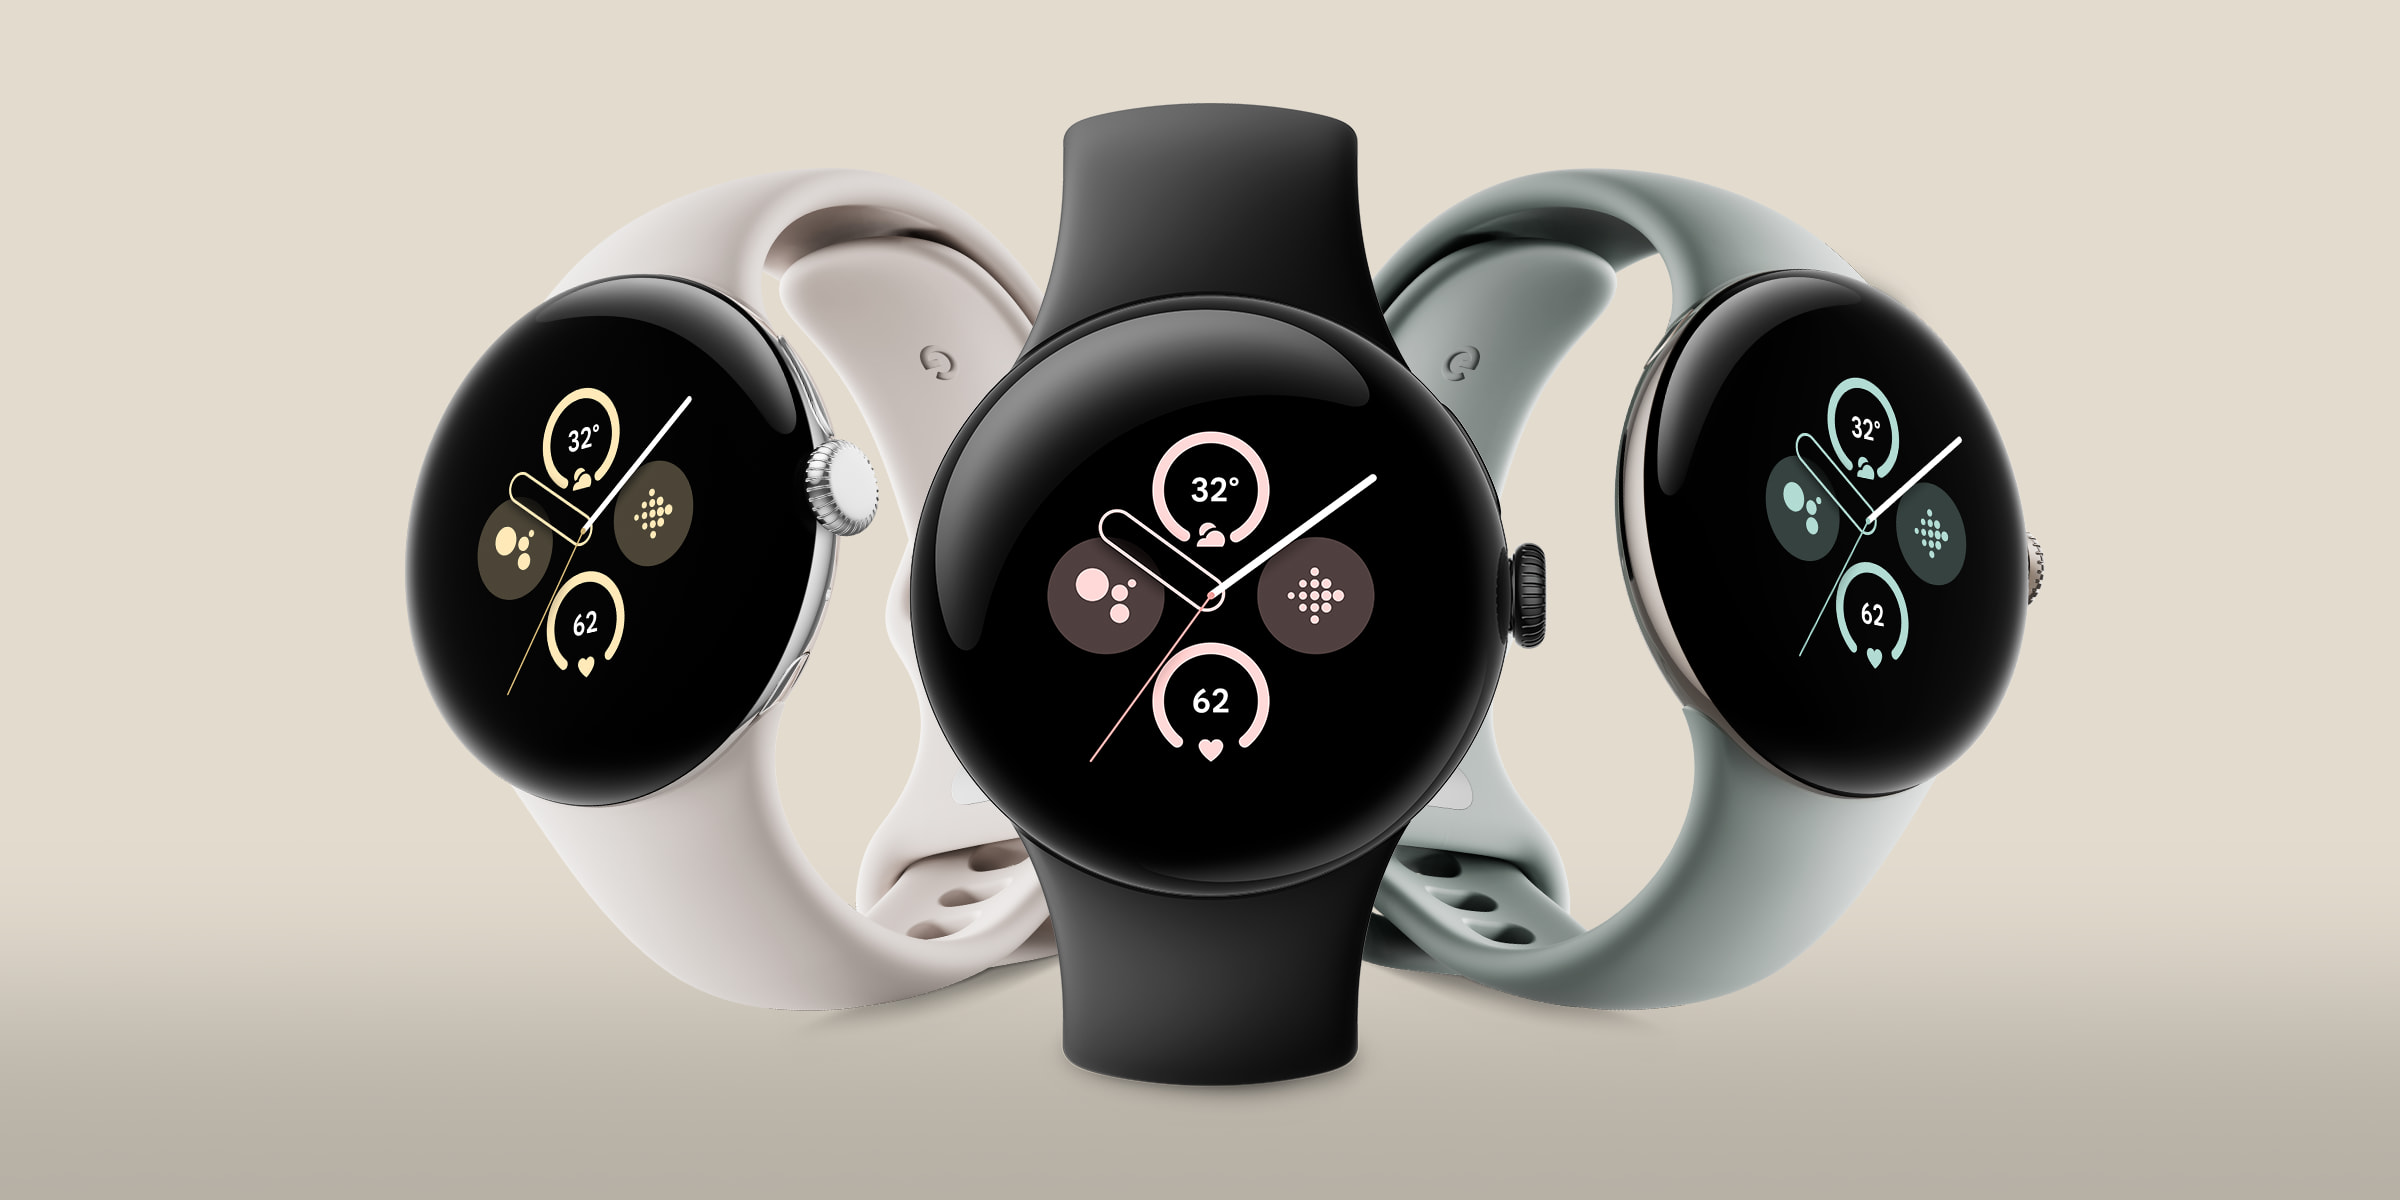 Pixel Watch 2 announced: 24-hour AOD battery, stress tracking